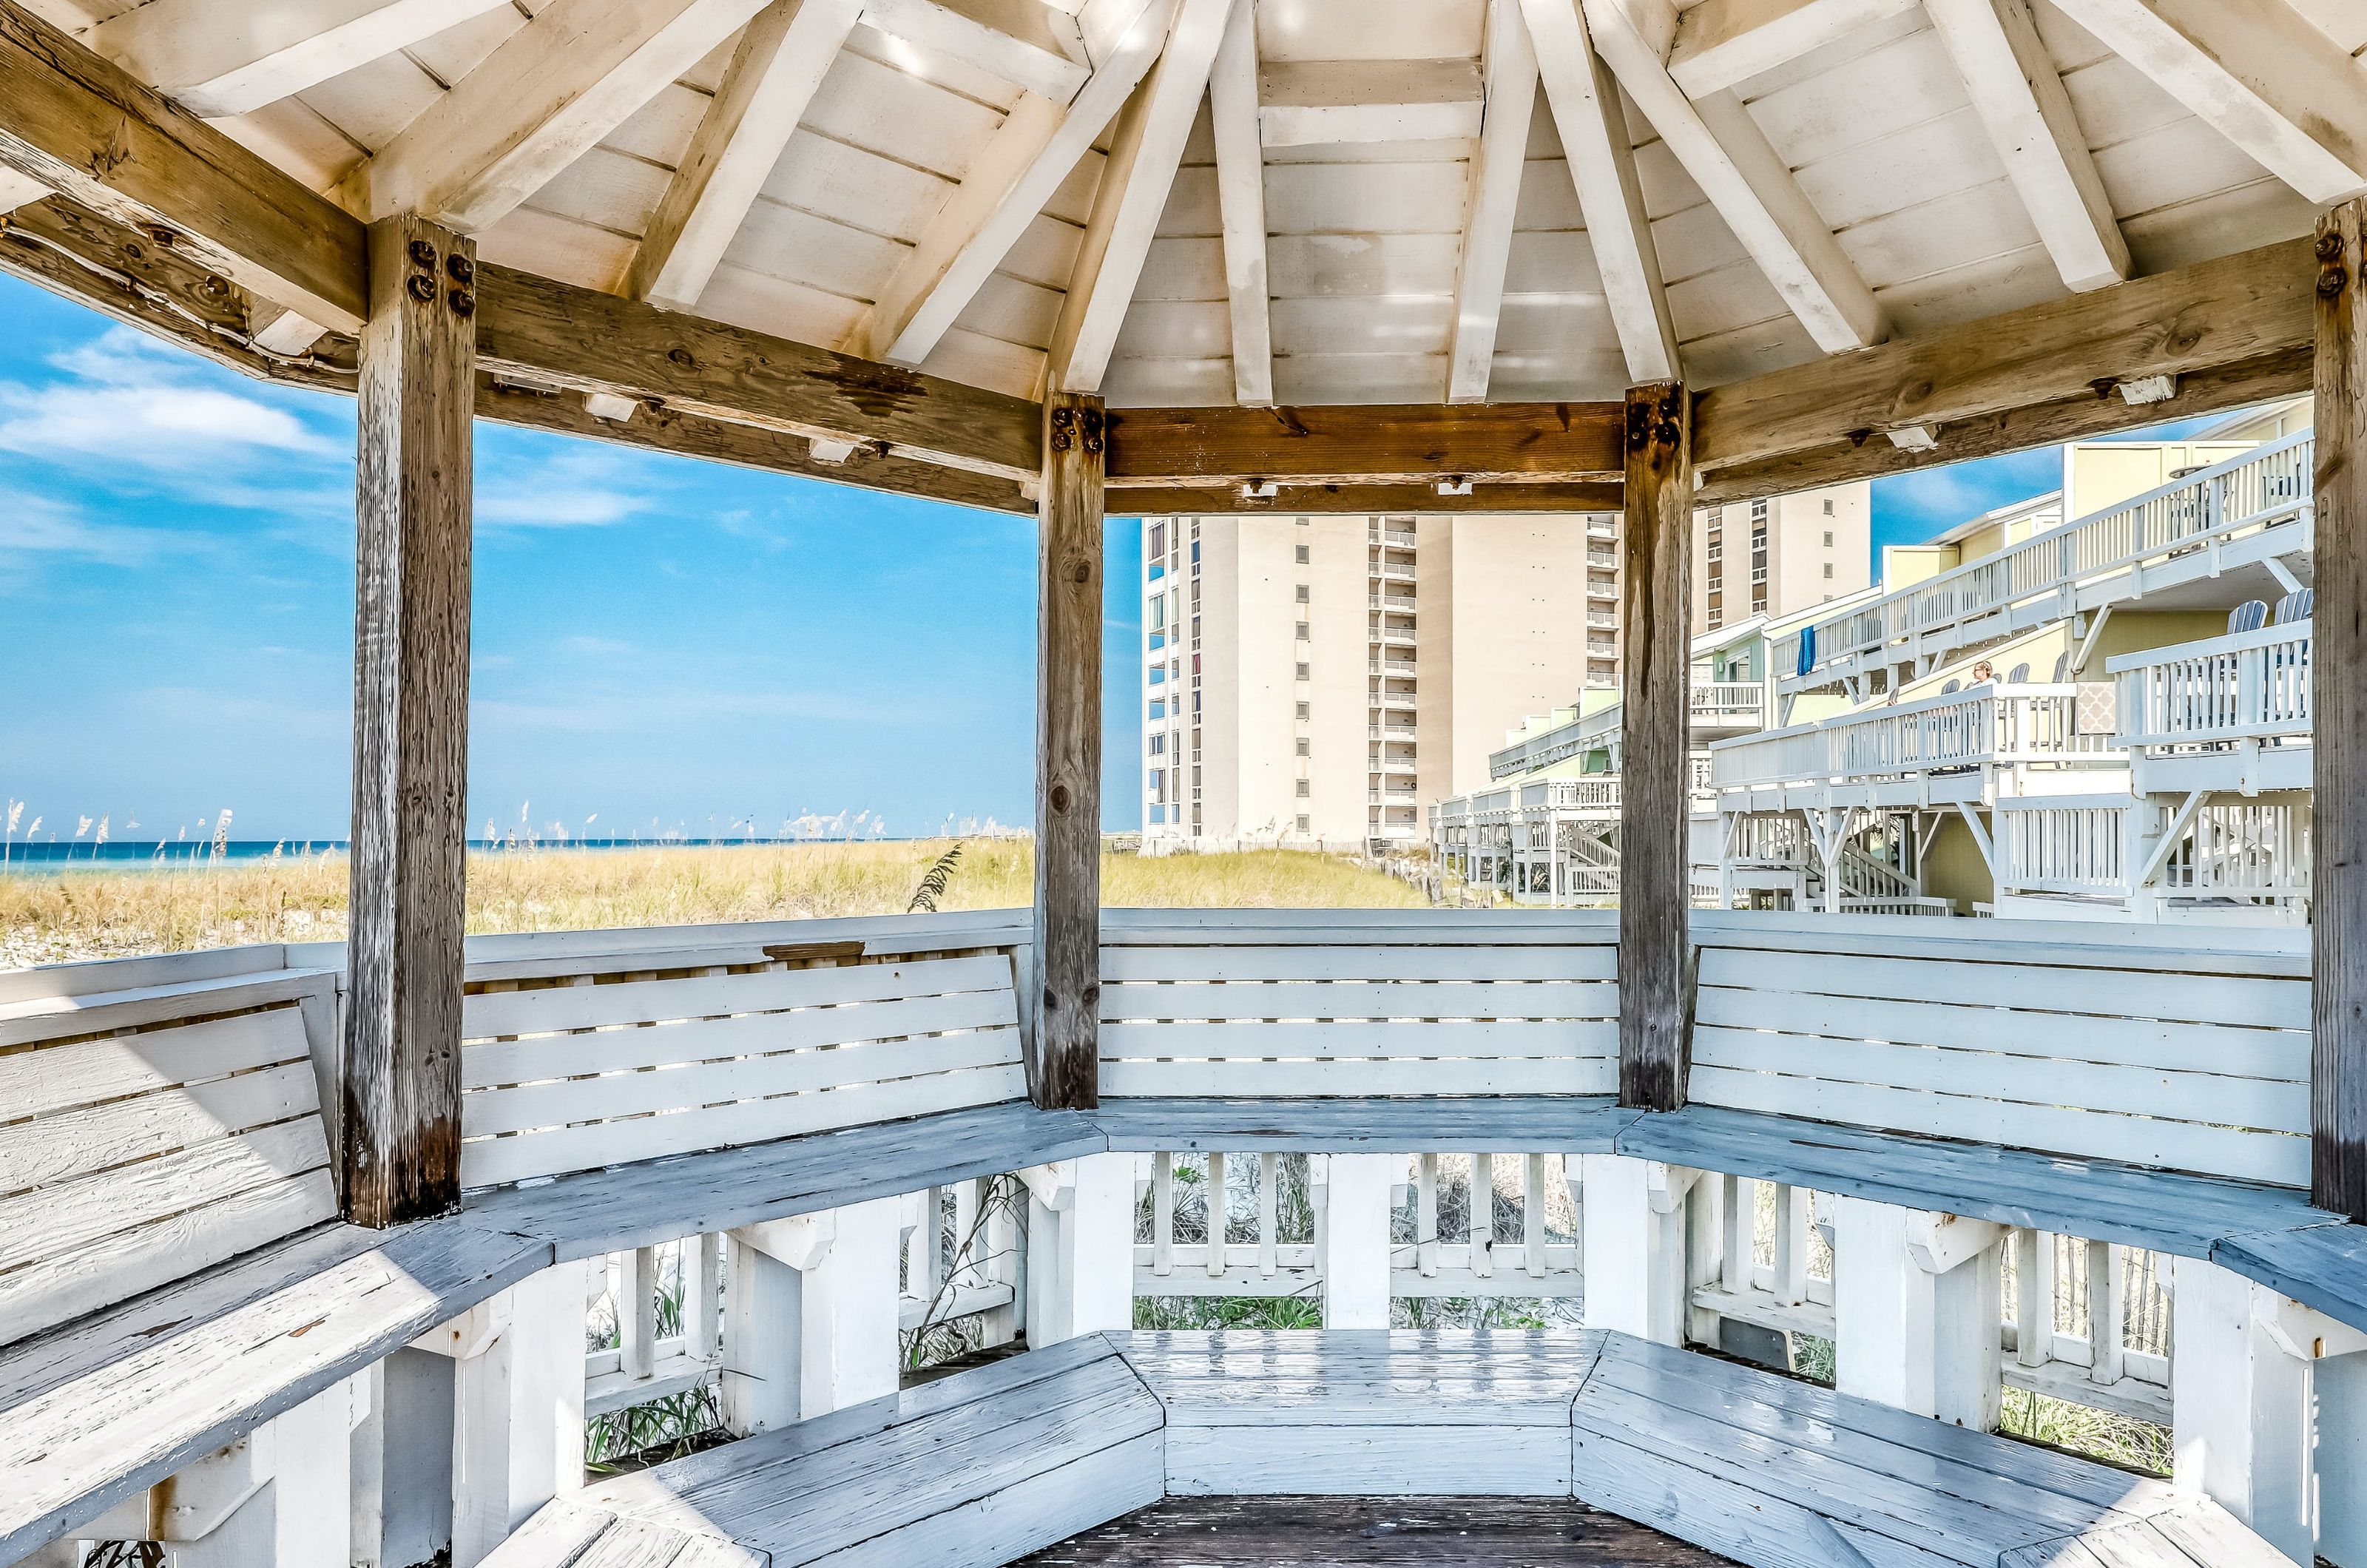 Southbay by the Gulf - https://www.beachguide.com/destin-vacation-rentals-southbay-by-the-gulf-9650520.jpg?width=185&height=185